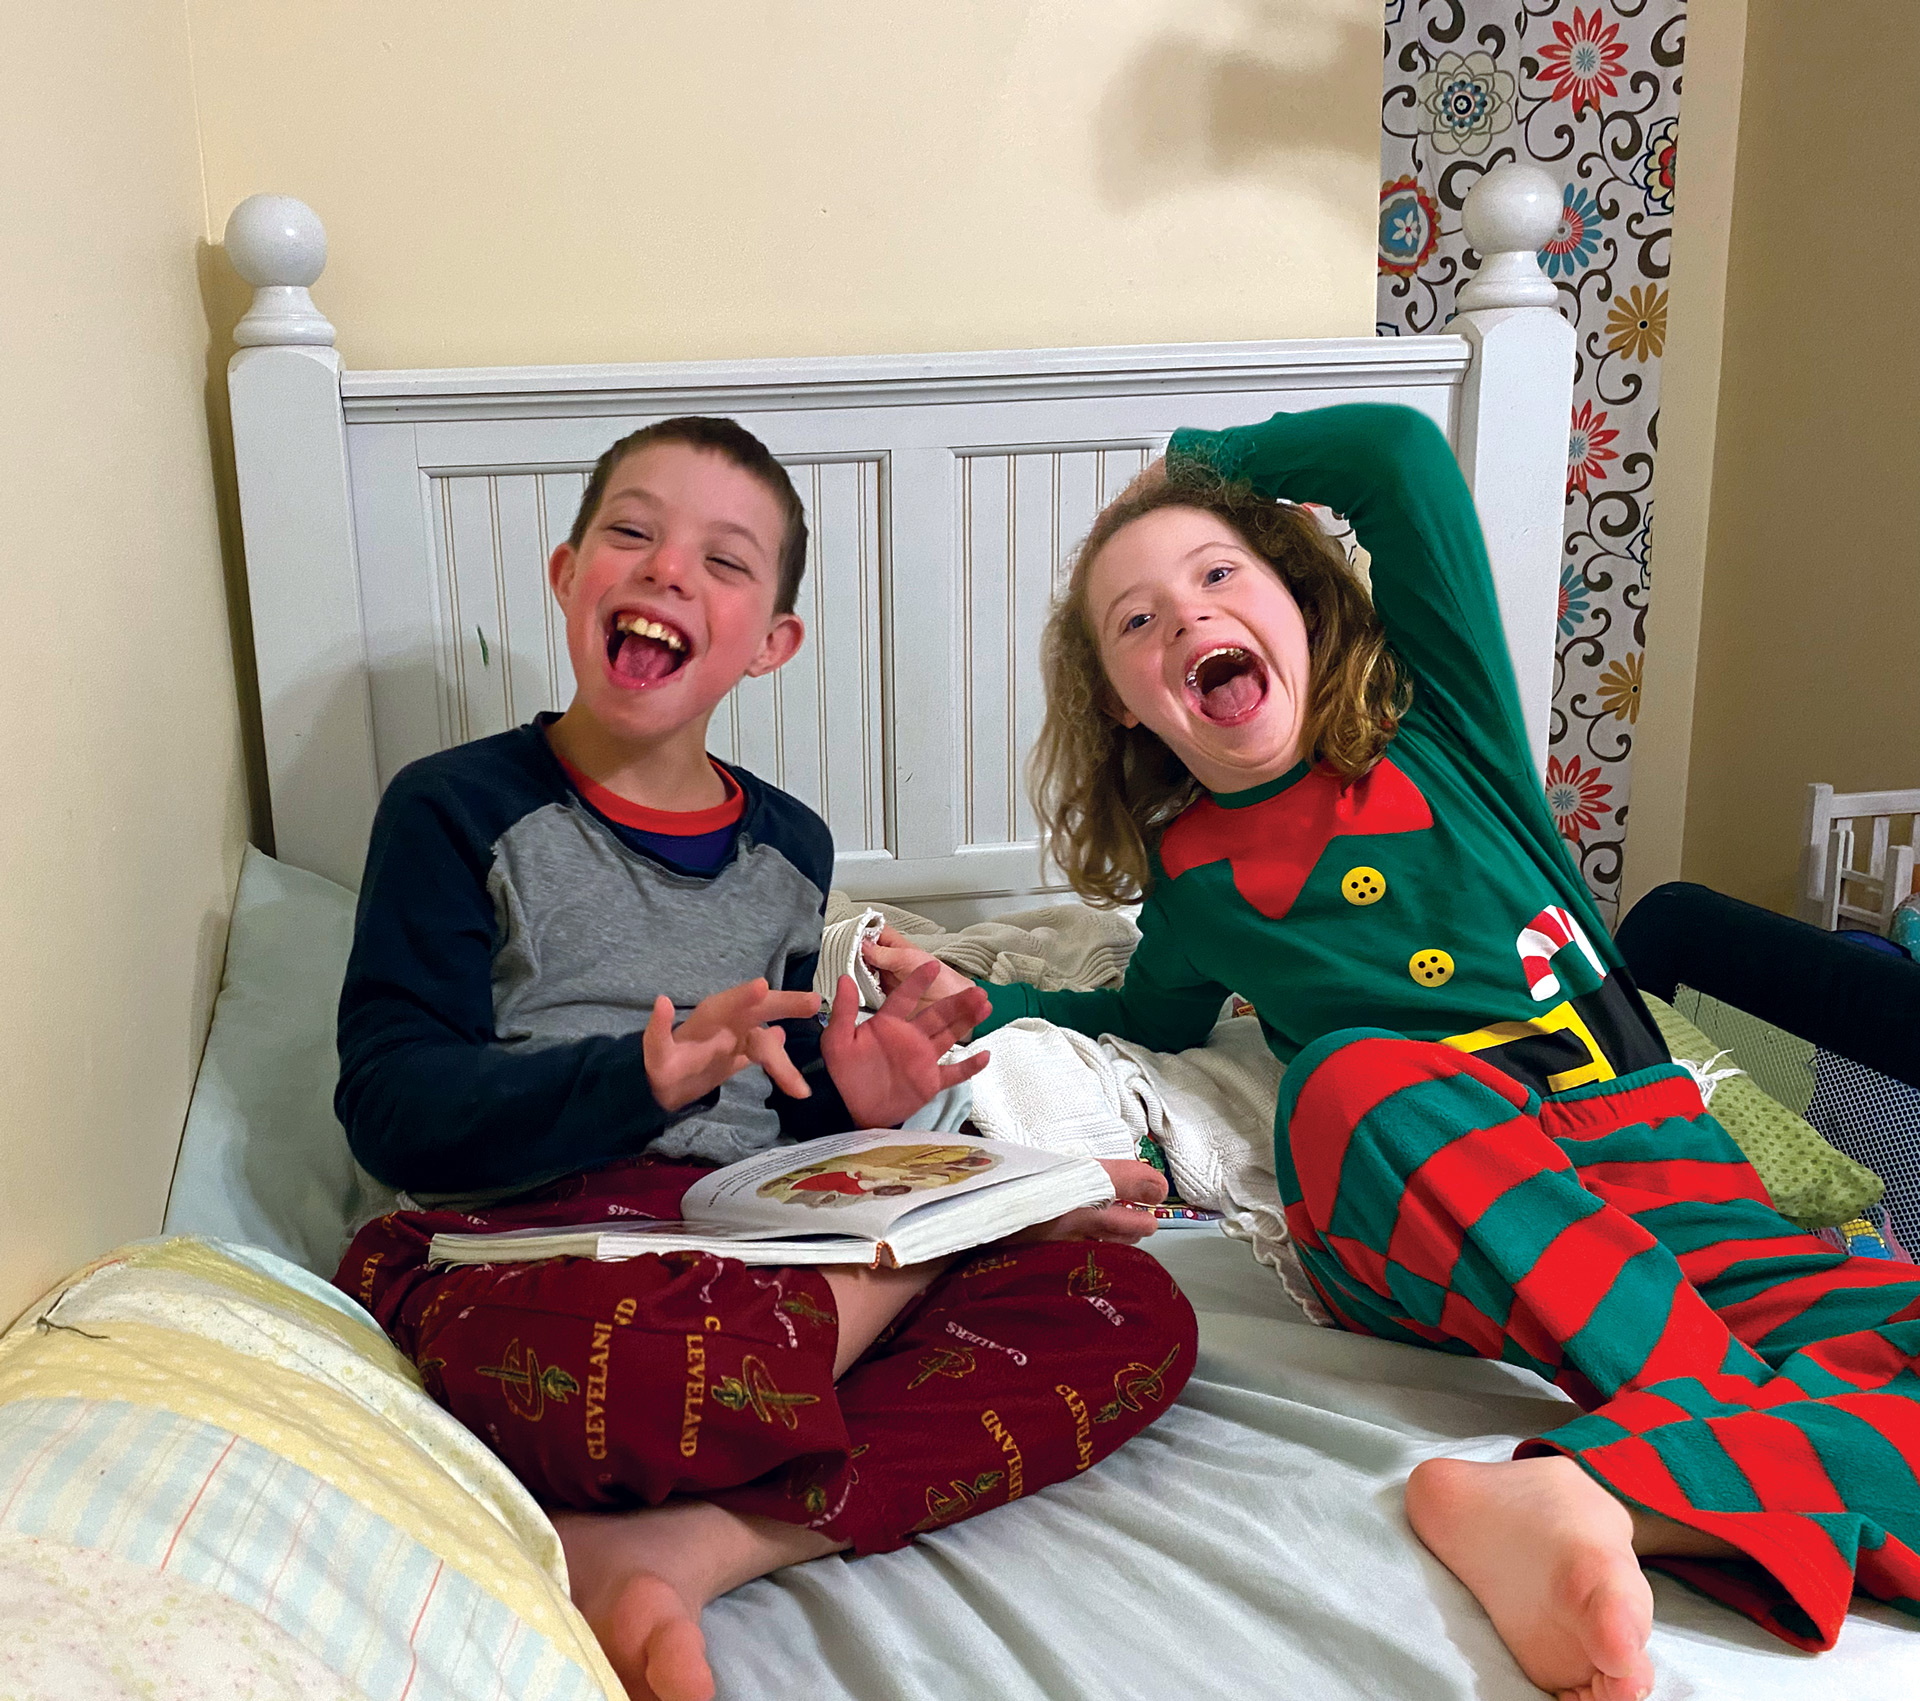 Two of Marlin's kids, Adelaide and Bennett, ready for a bedtime Bible story